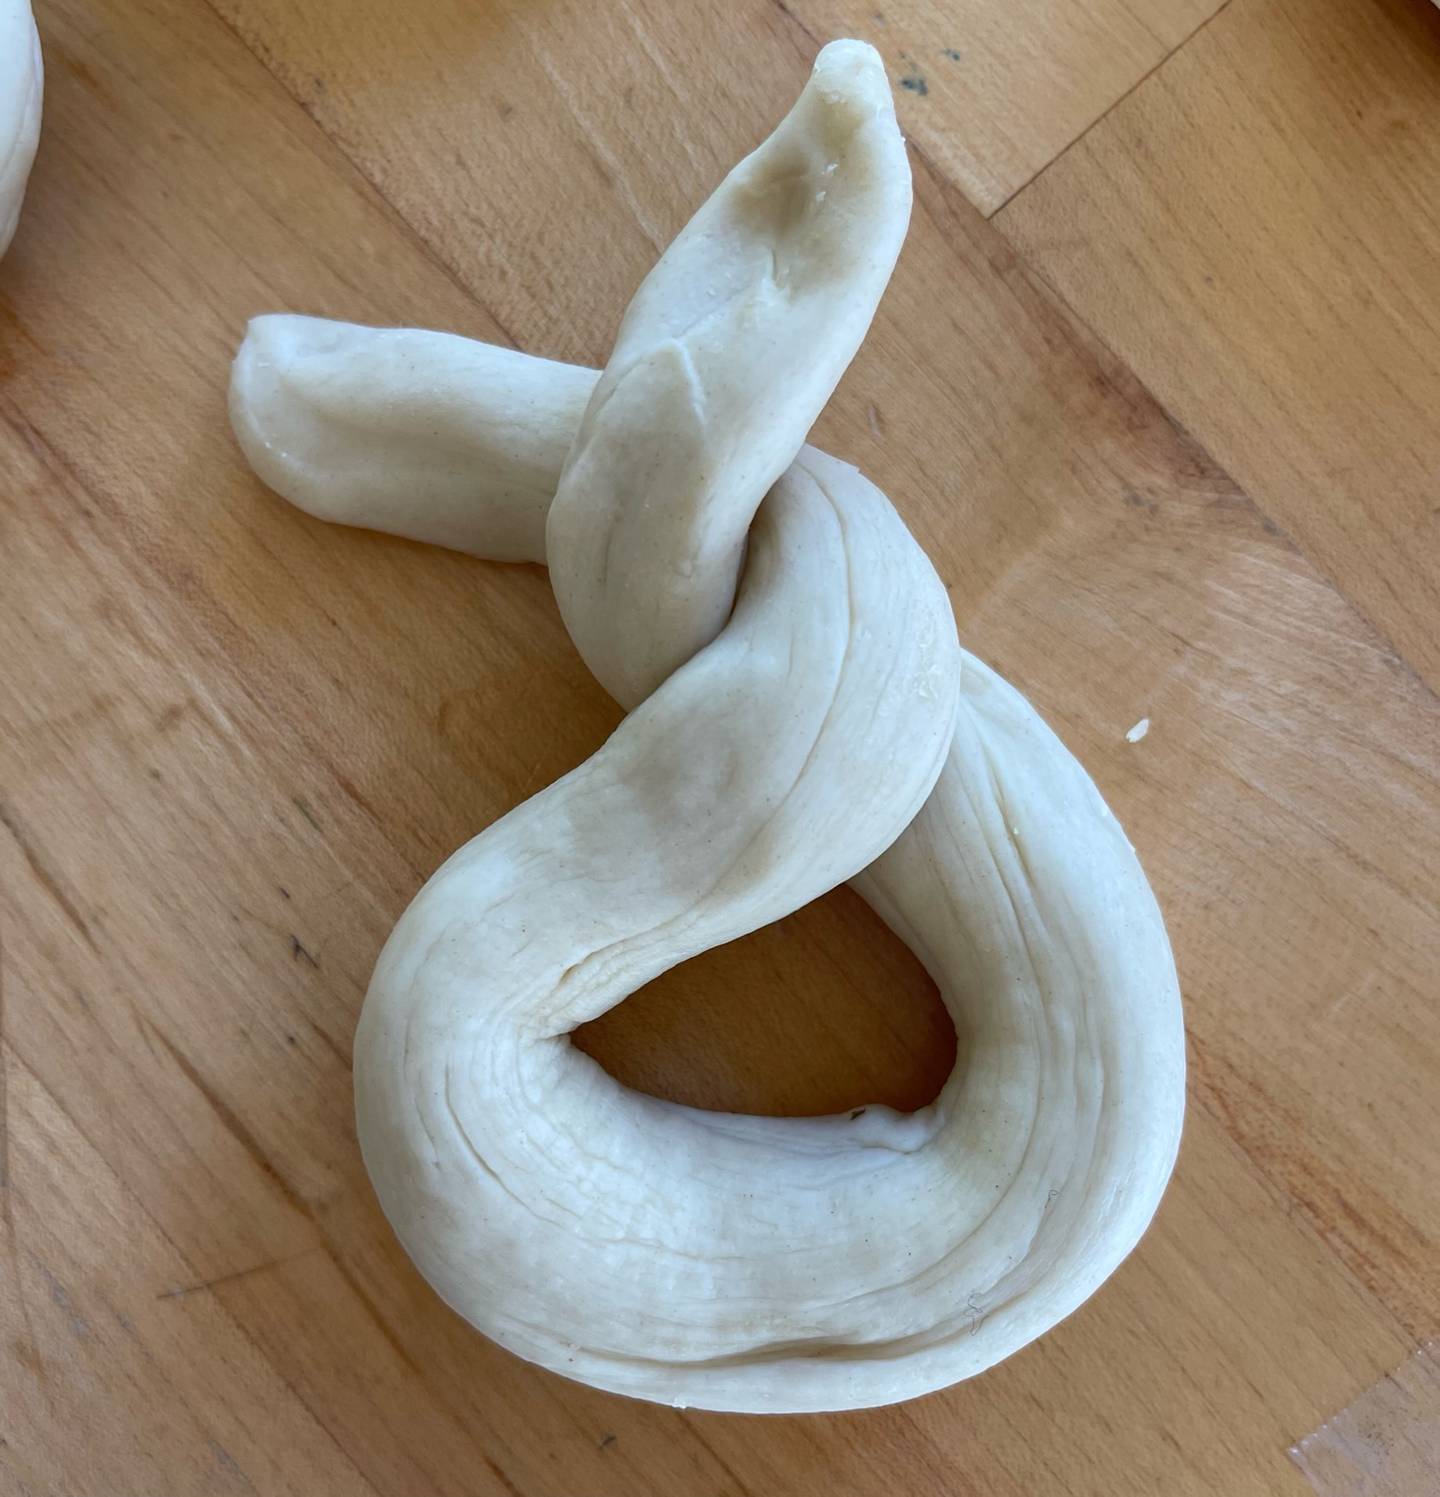 The early stages of making an everything-spice pretzel knot